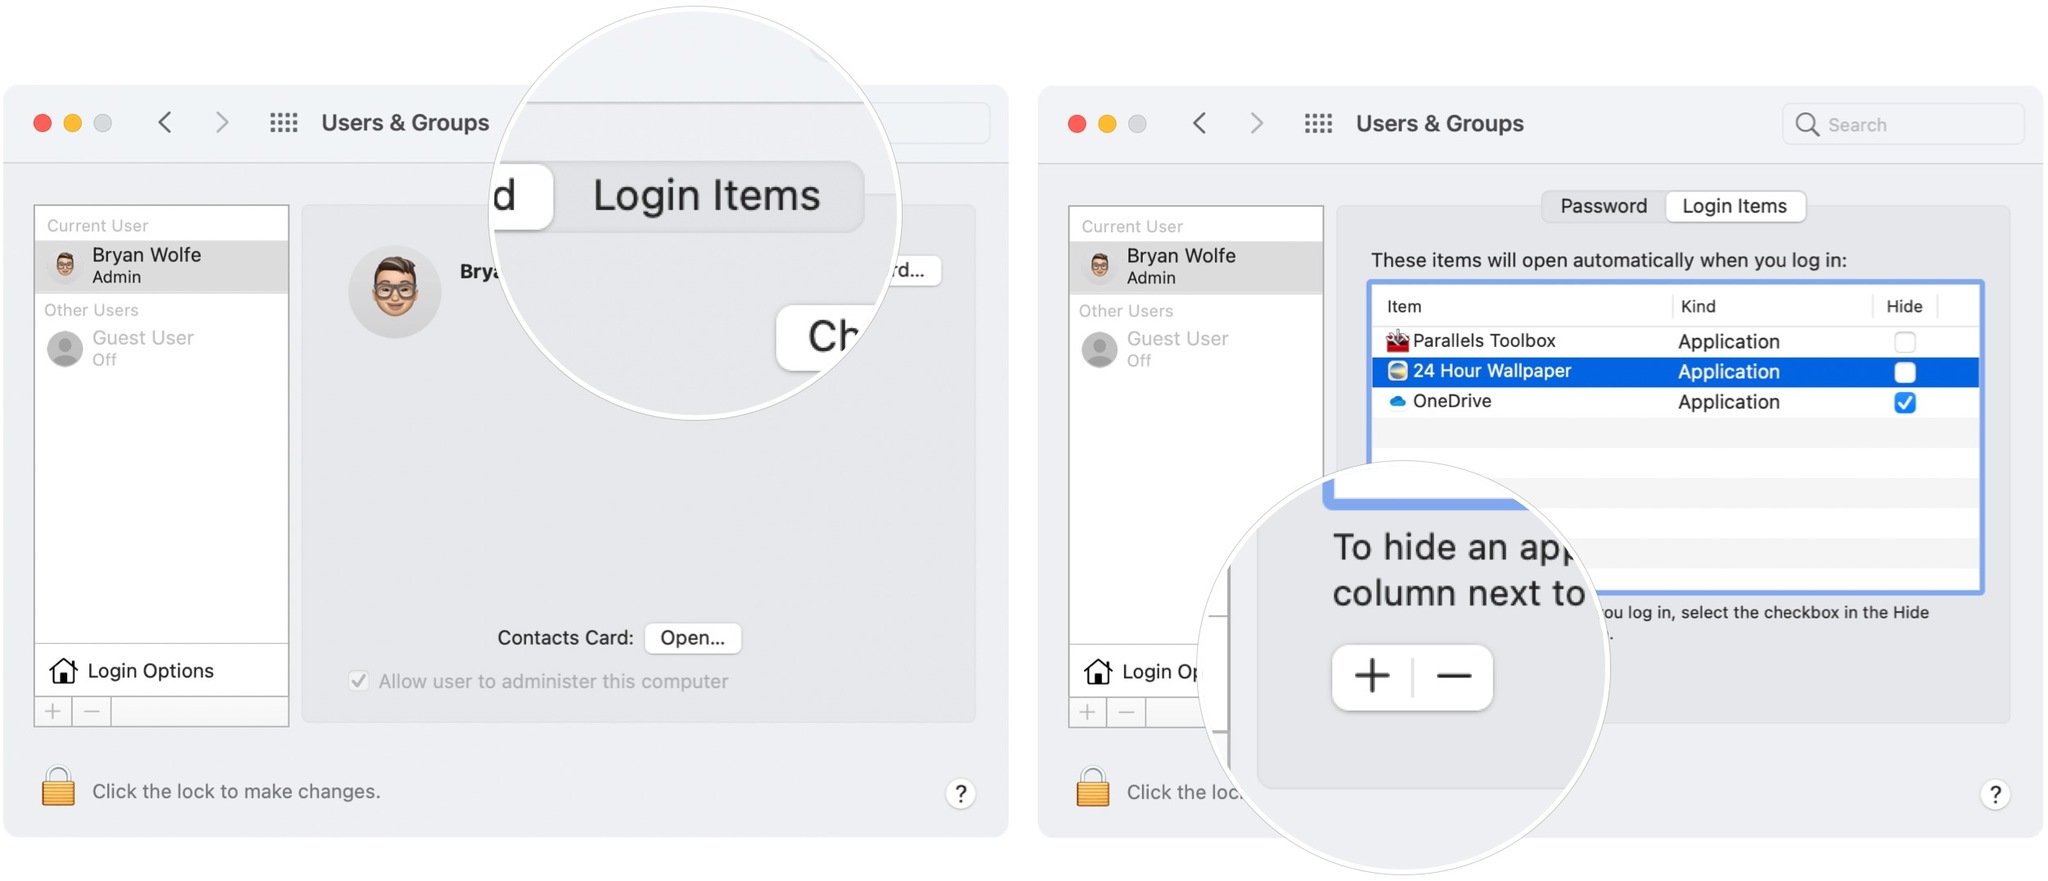 To check and remove login items, choose your profile on the left side, then select the Login Items tab. Highlight the one you wish to delete, then choose the "-" to delete. Repeat to remove other login items.